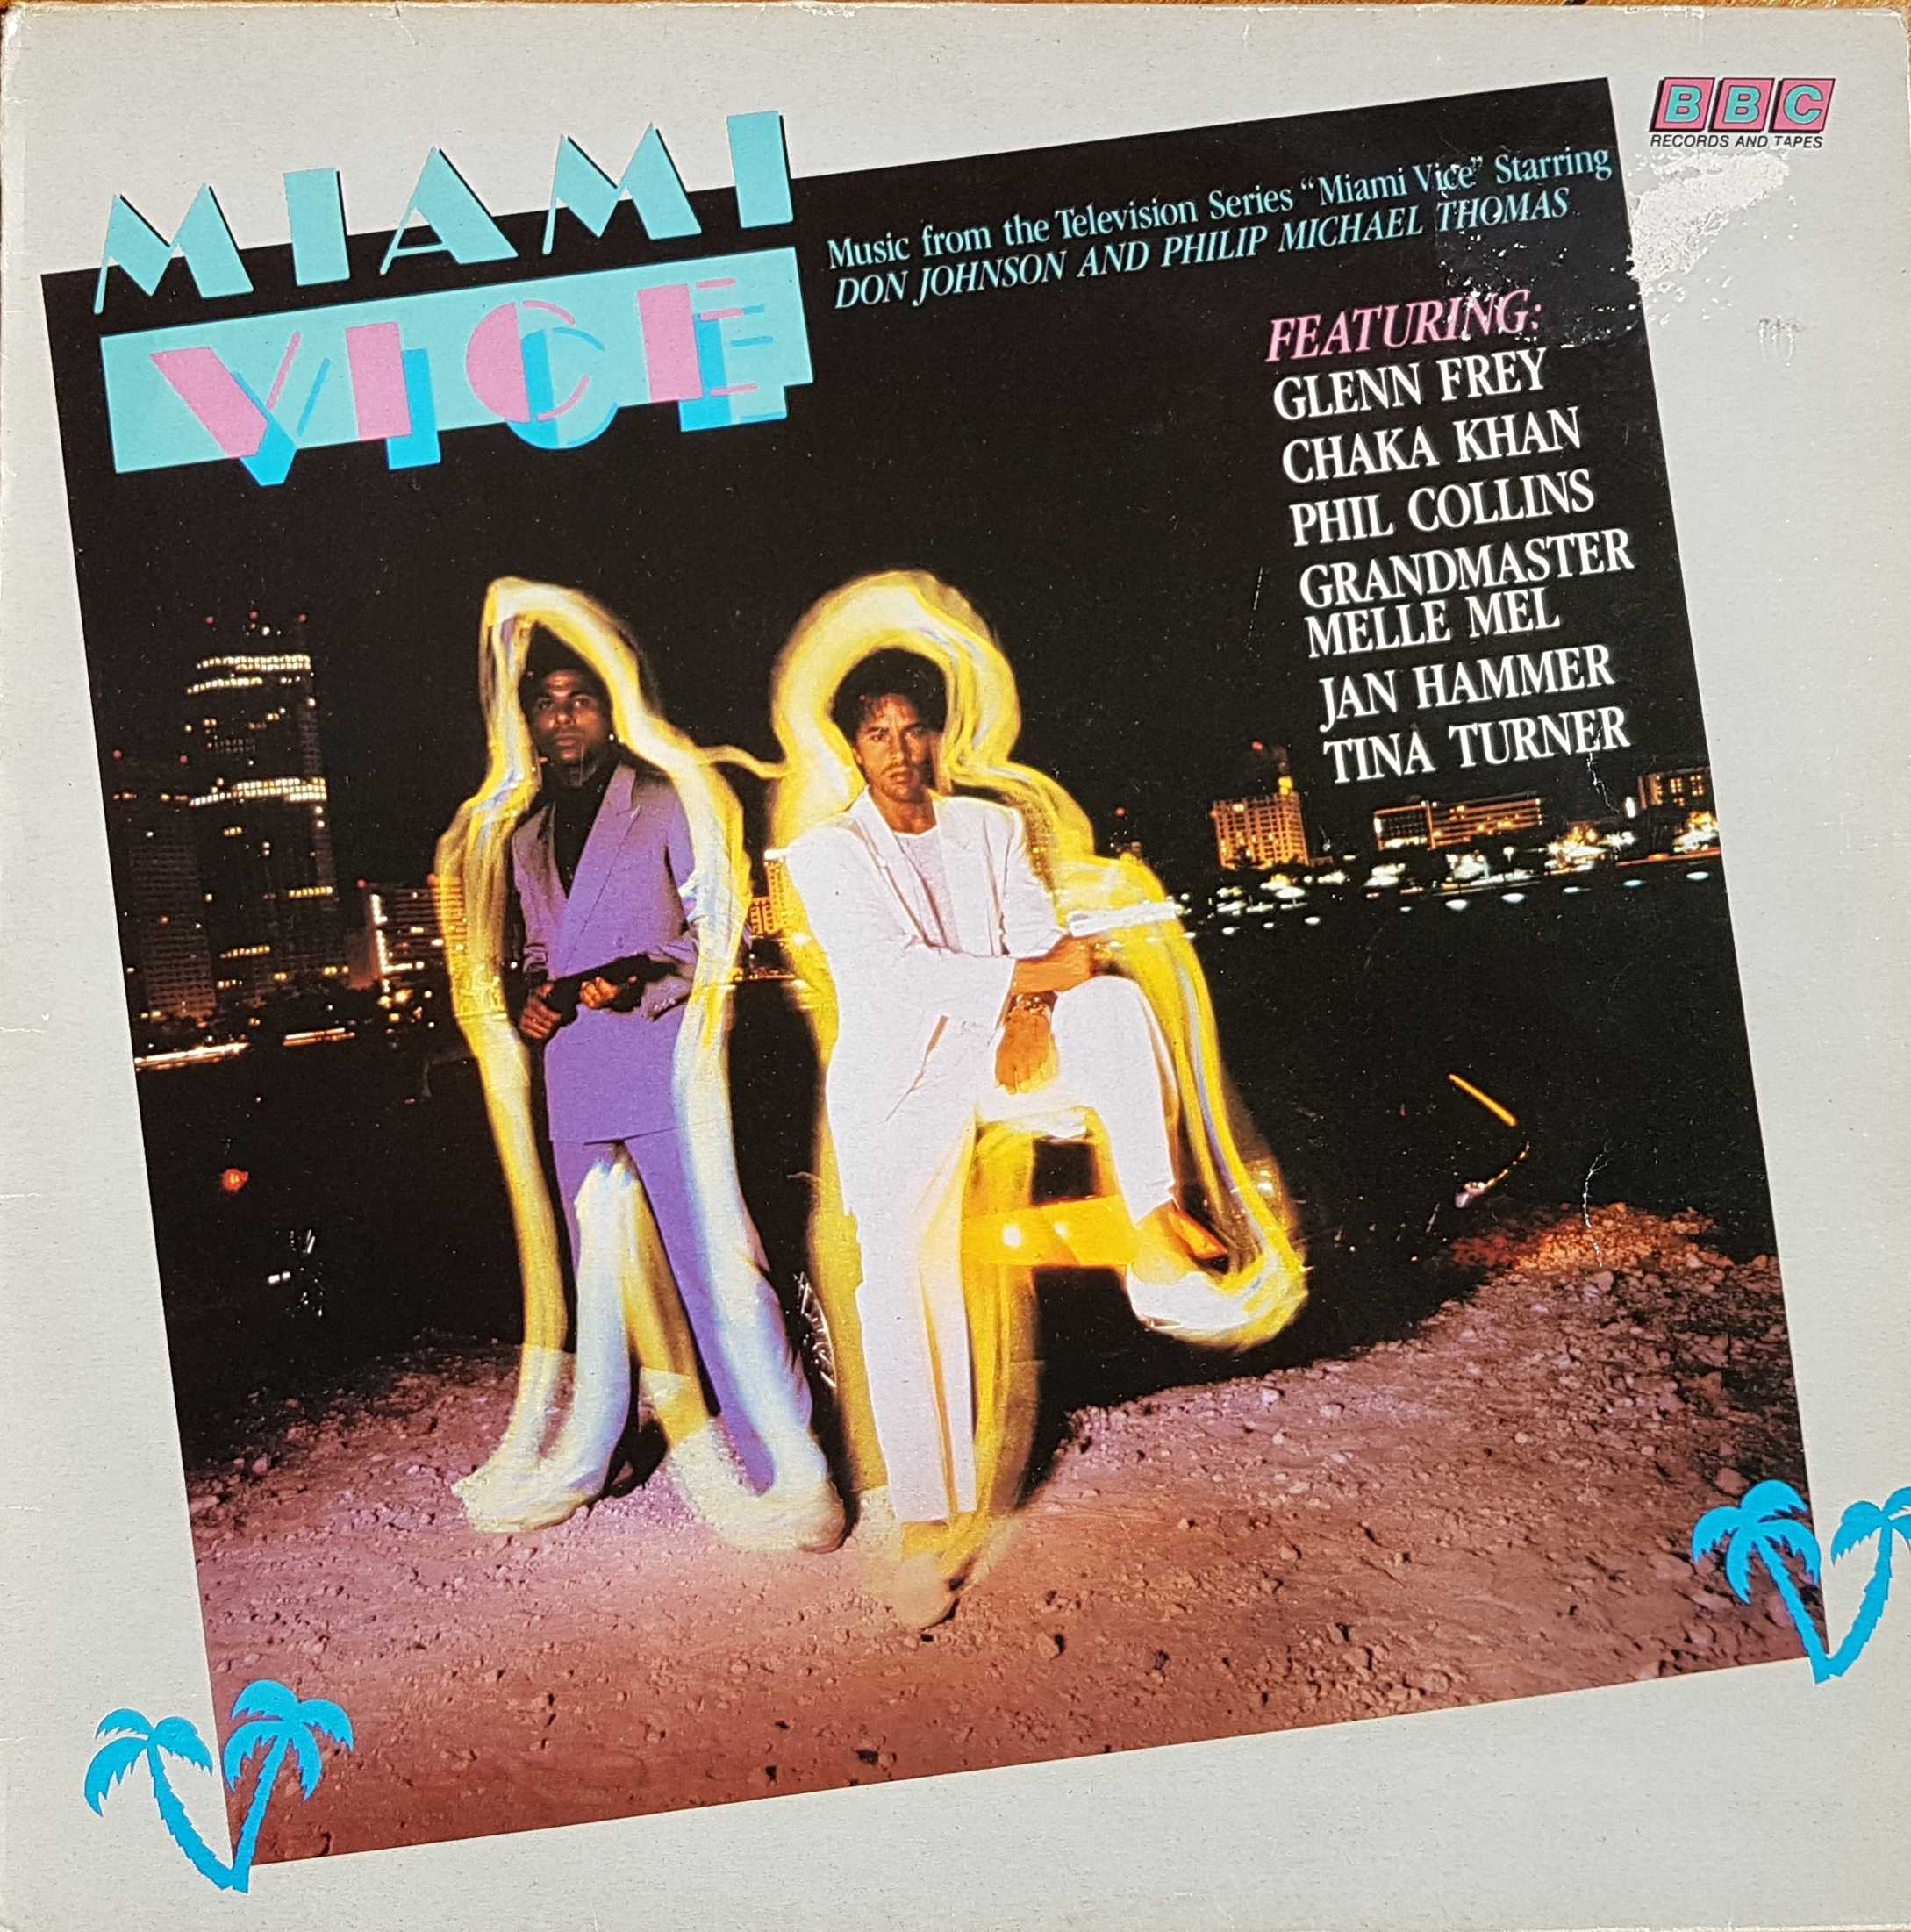 Picture of REMV 584 Miami vice by artist Various from the BBC albums - Records and Tapes library